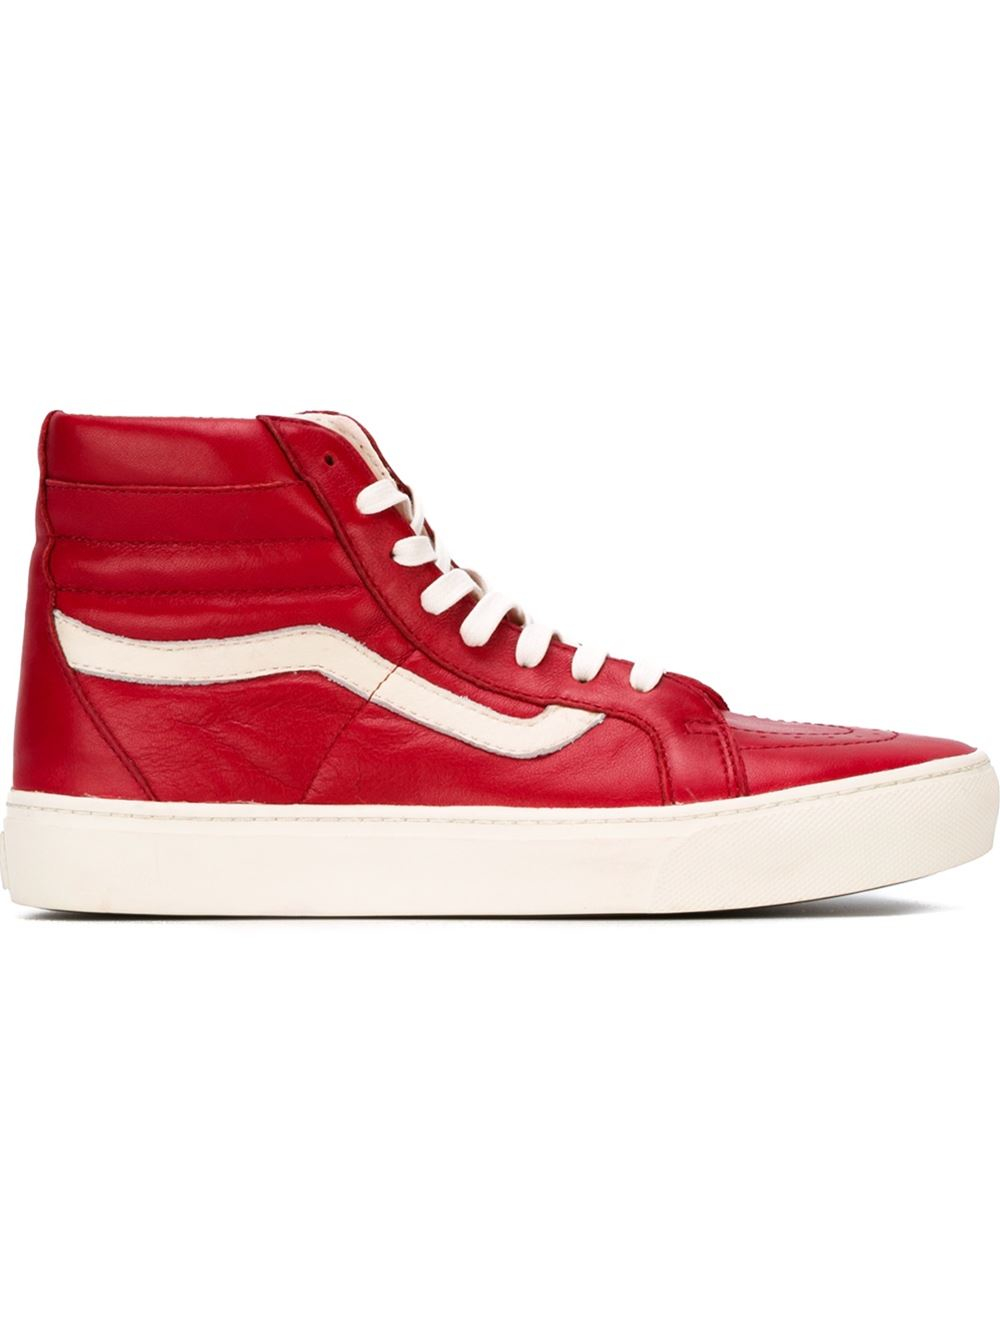 vans red leather shoes